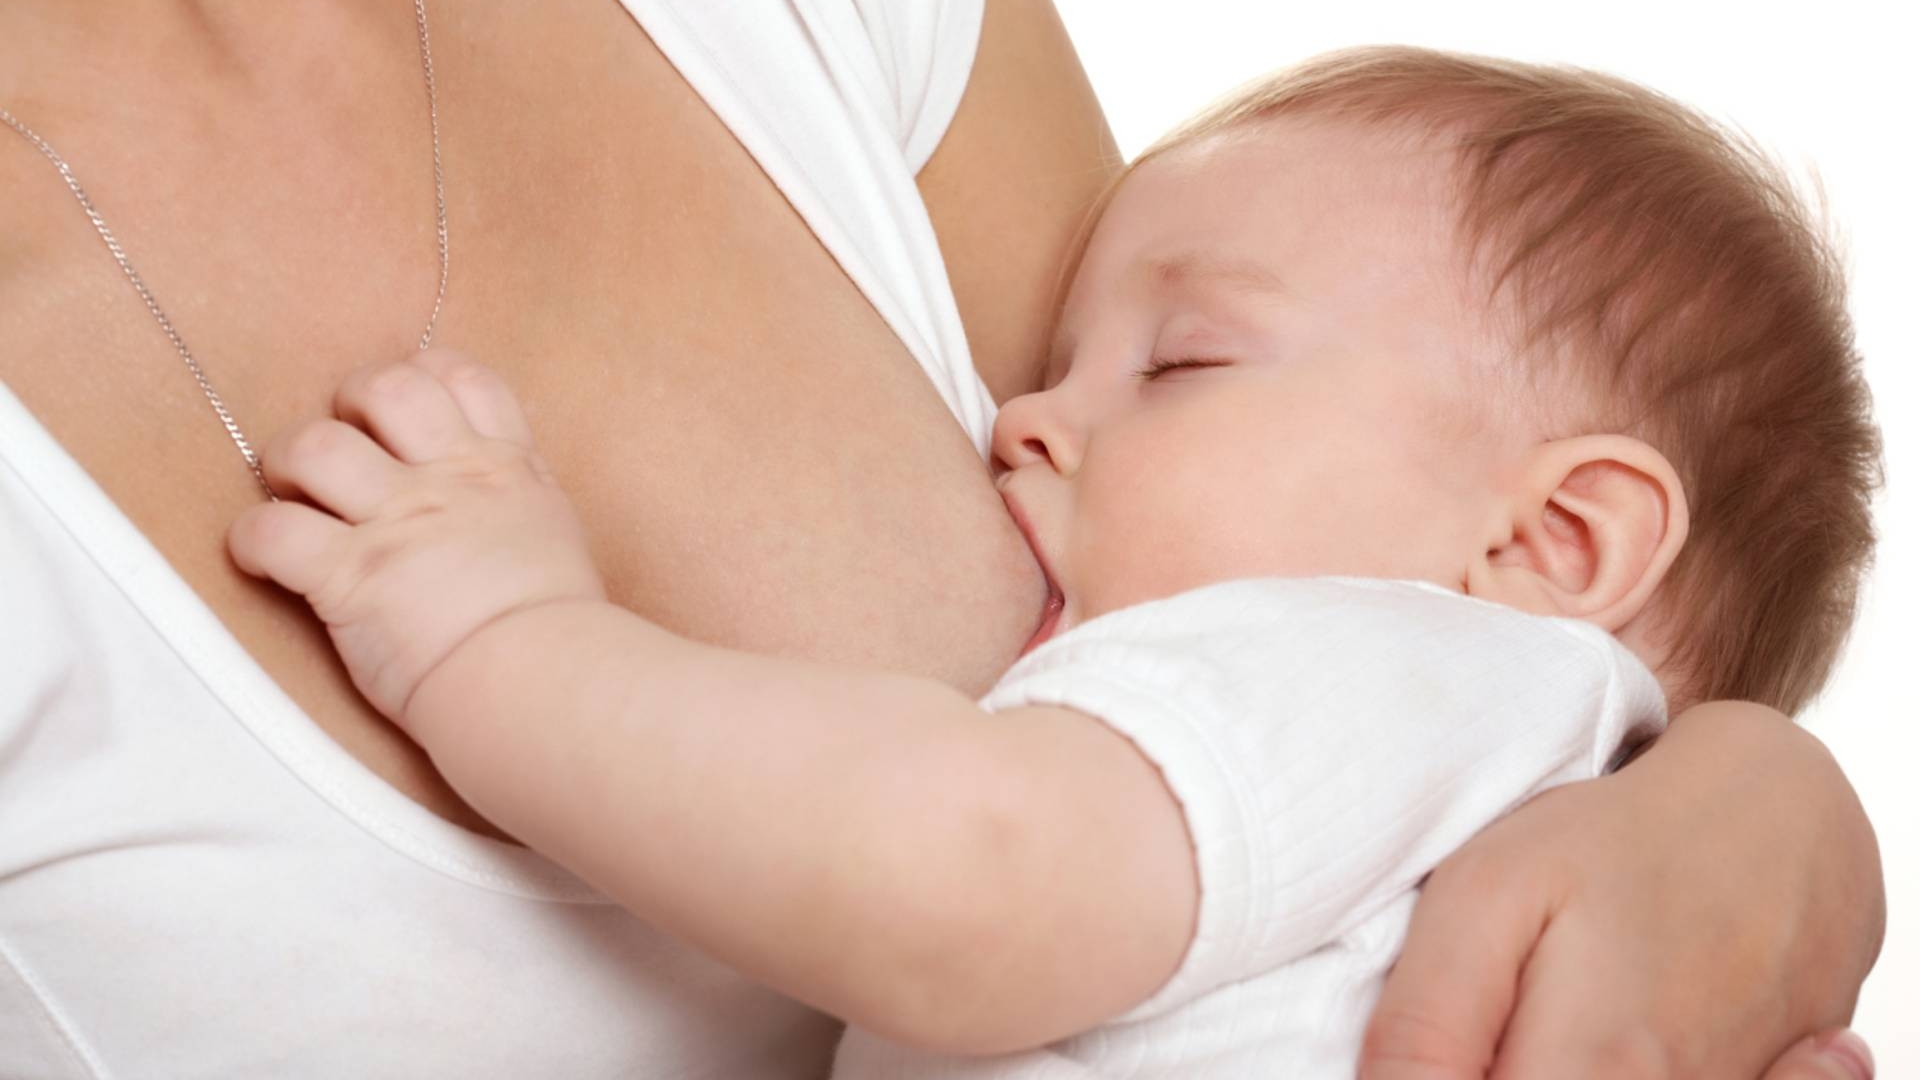 Help with breastfeeding challenges or assistance in getting you off to a good start